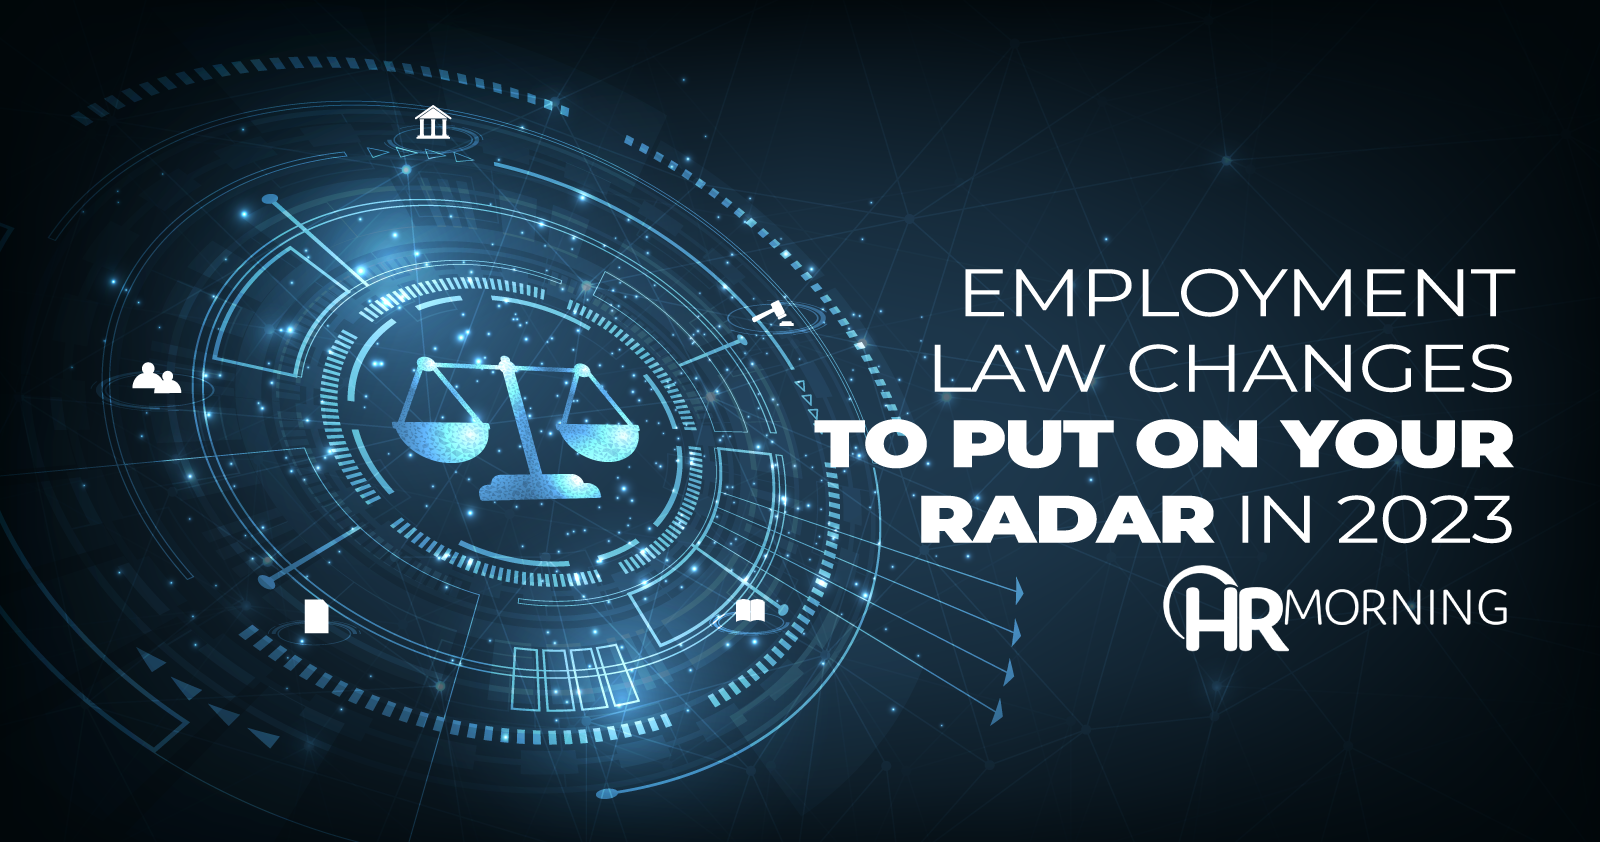 Employment law changes to put on your radar in 2023